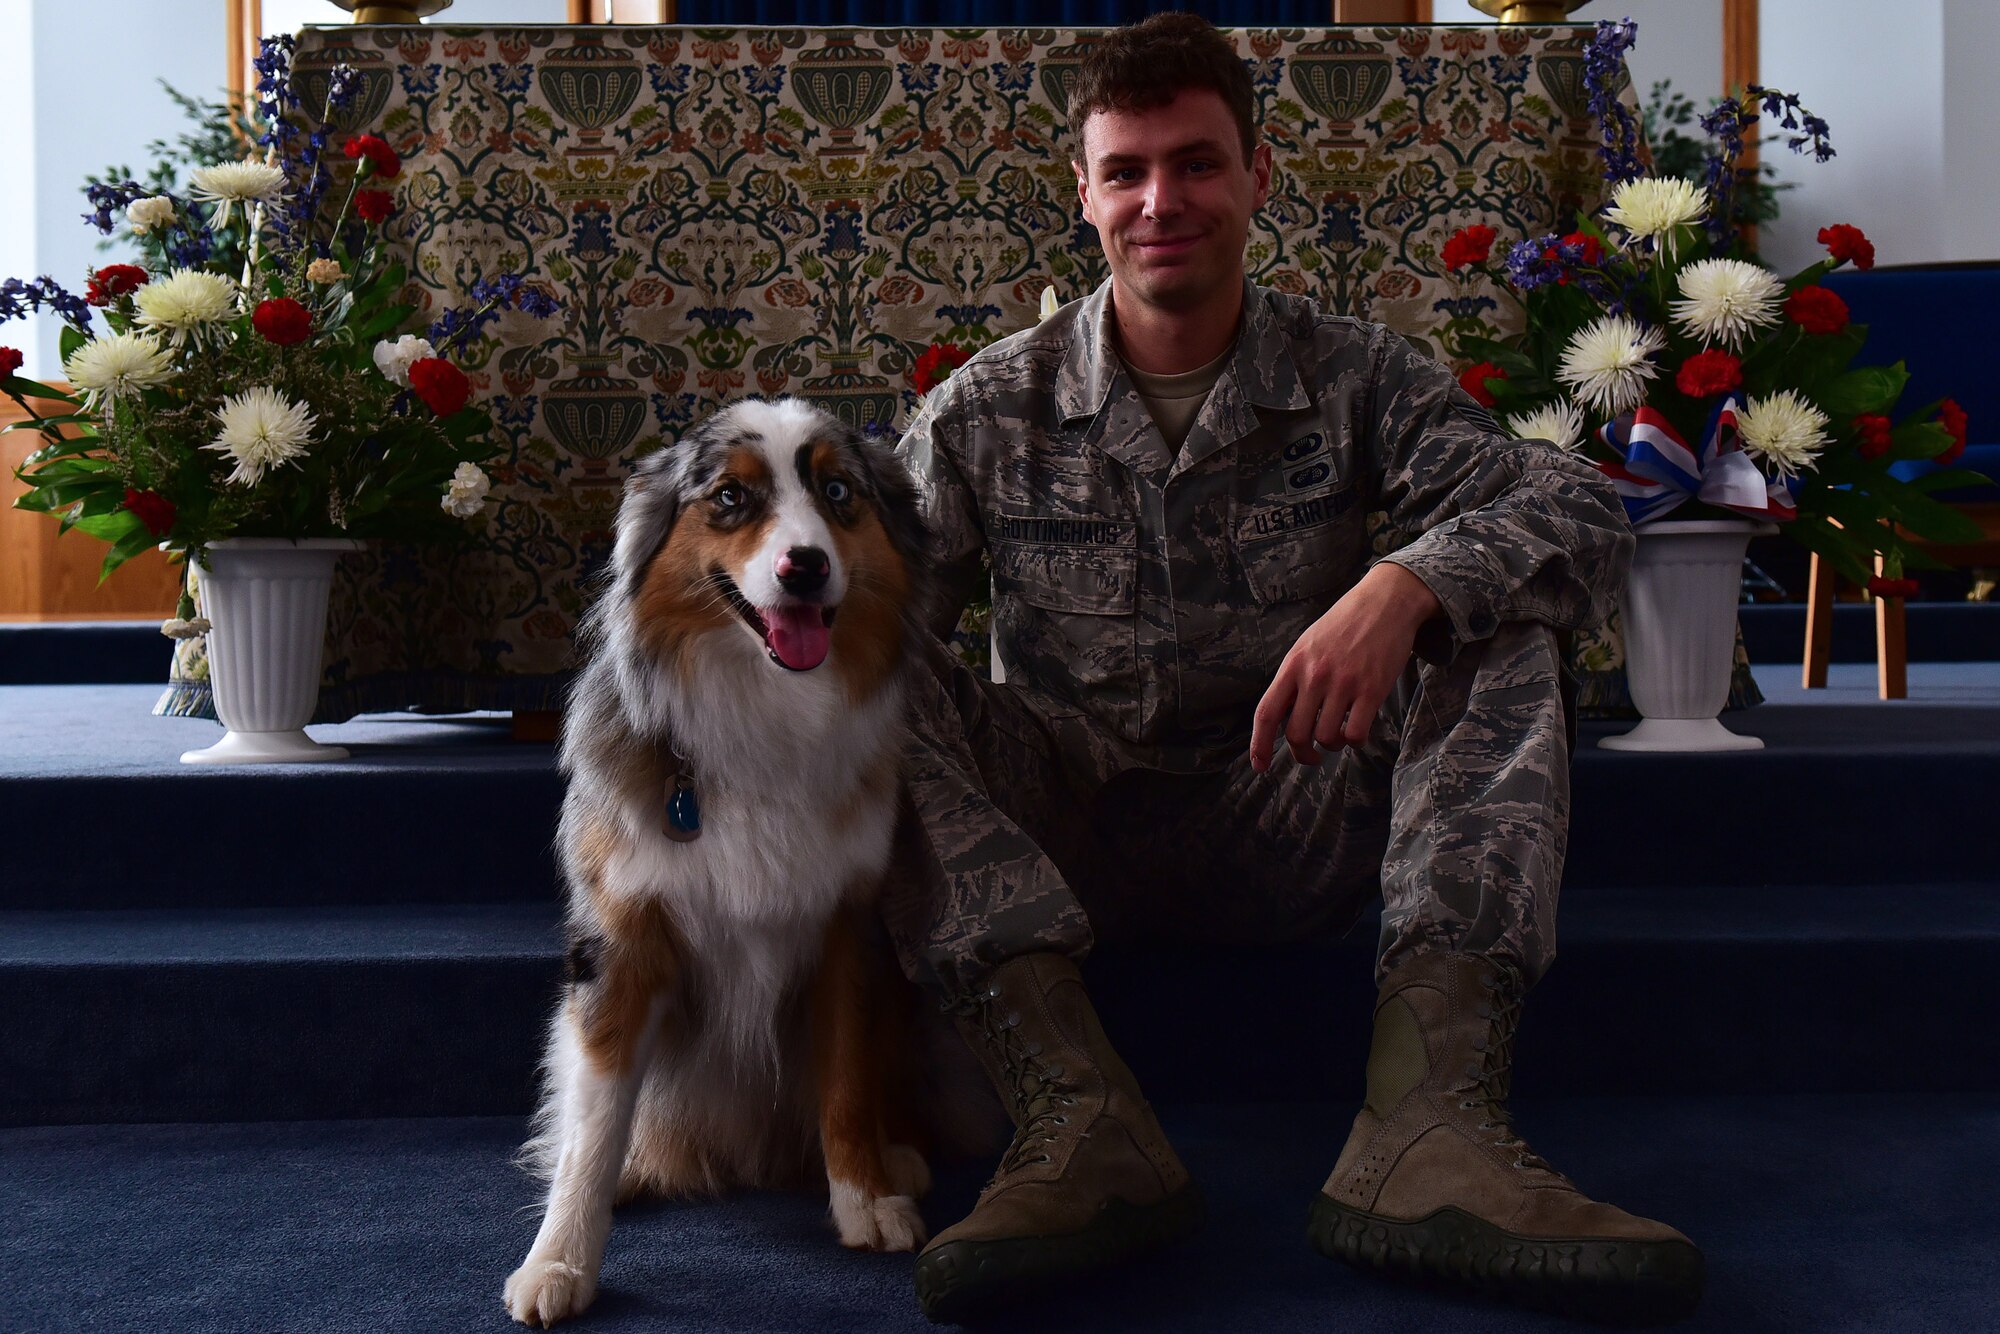 Staff Sgt. Kolton Rottinghaus trained to become Milo’s handler. Milo is a two-year-old Australian Shepherd. (U.S. Air Force photo by Airman Rhett Isbell)